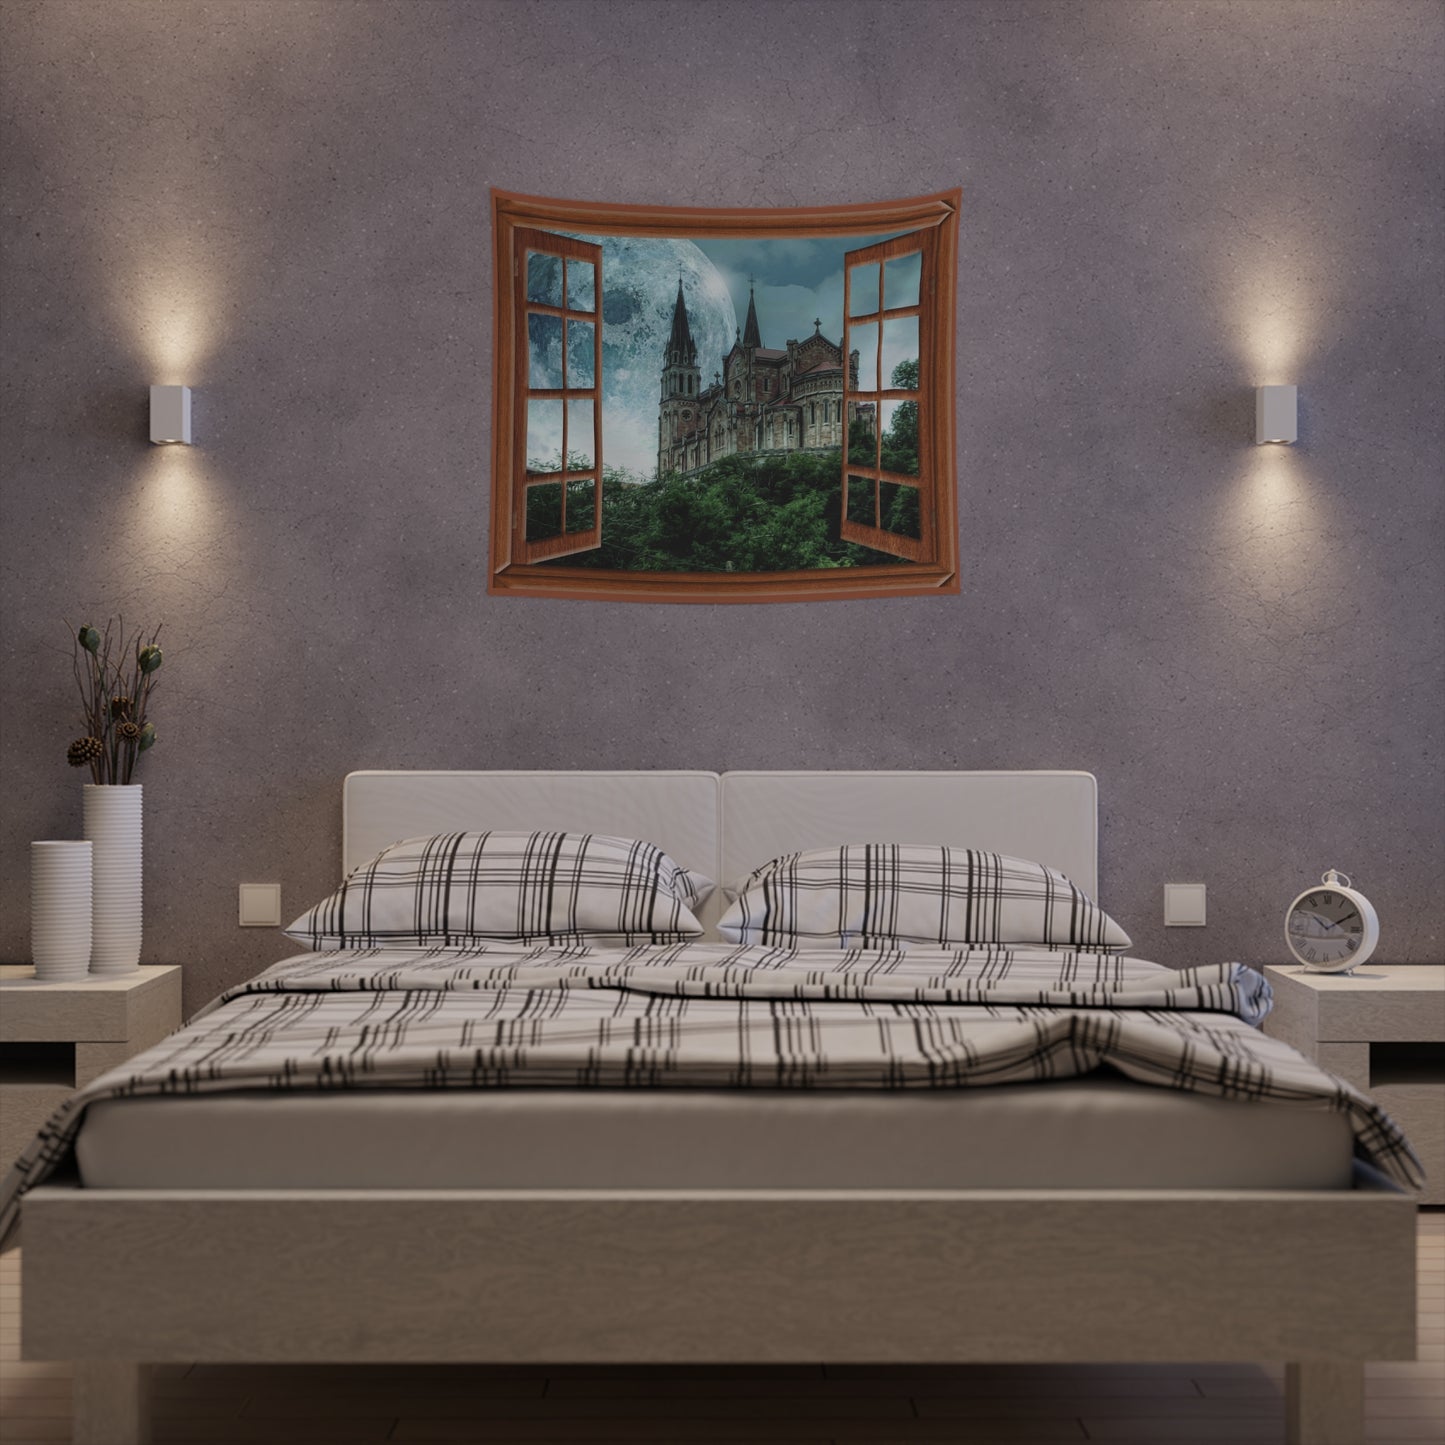 Moon Castle Wall Tapestry